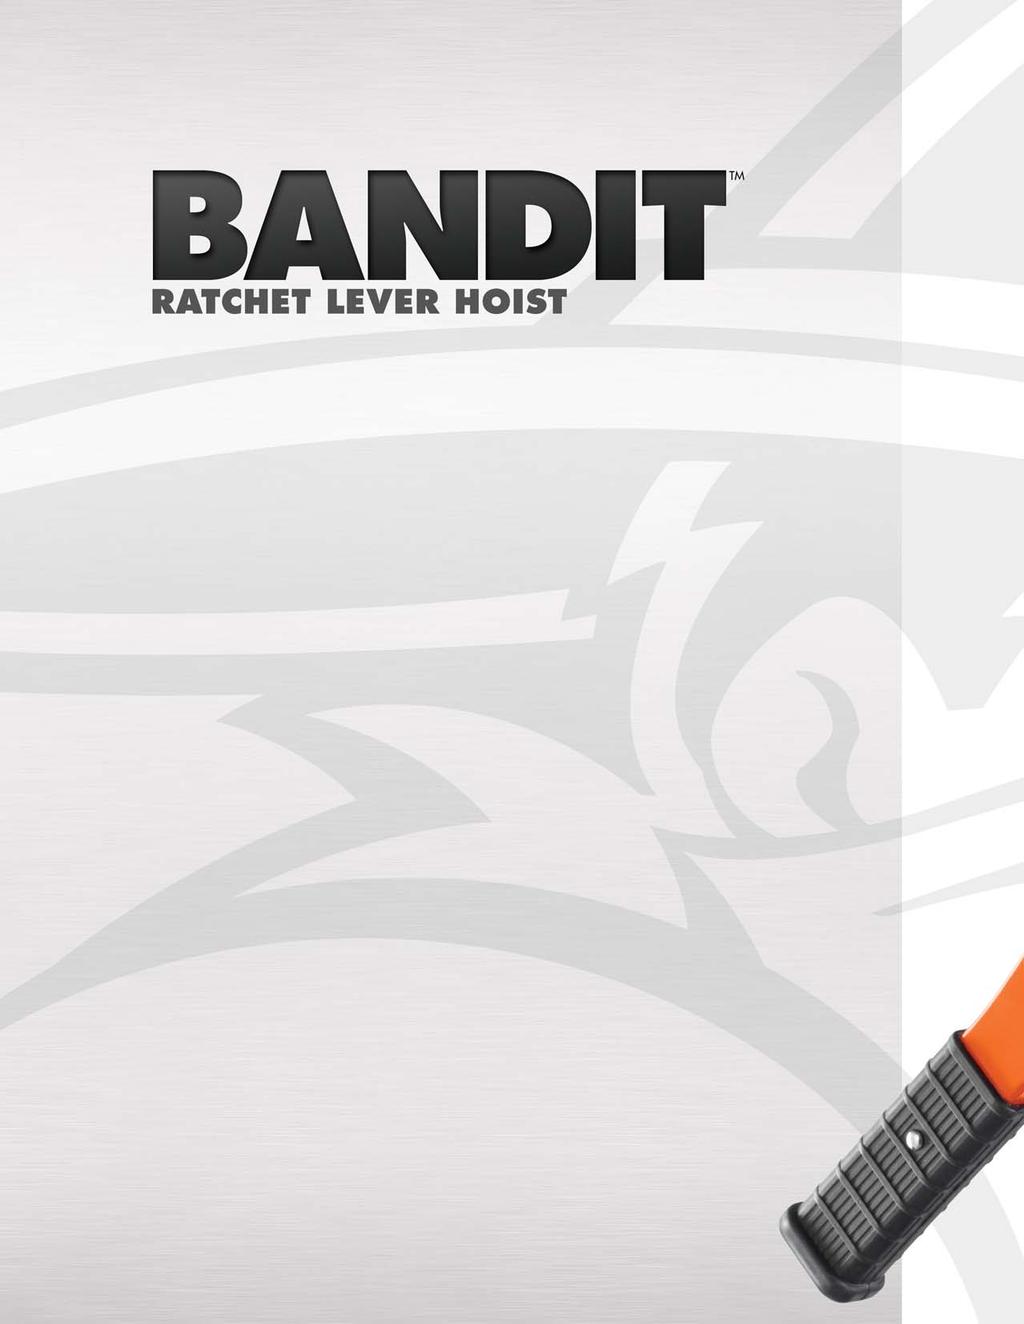 RATCHET LEVER HOIST The CM Bandit is one of the most compact and durable ratchet lever hoists in the industry.